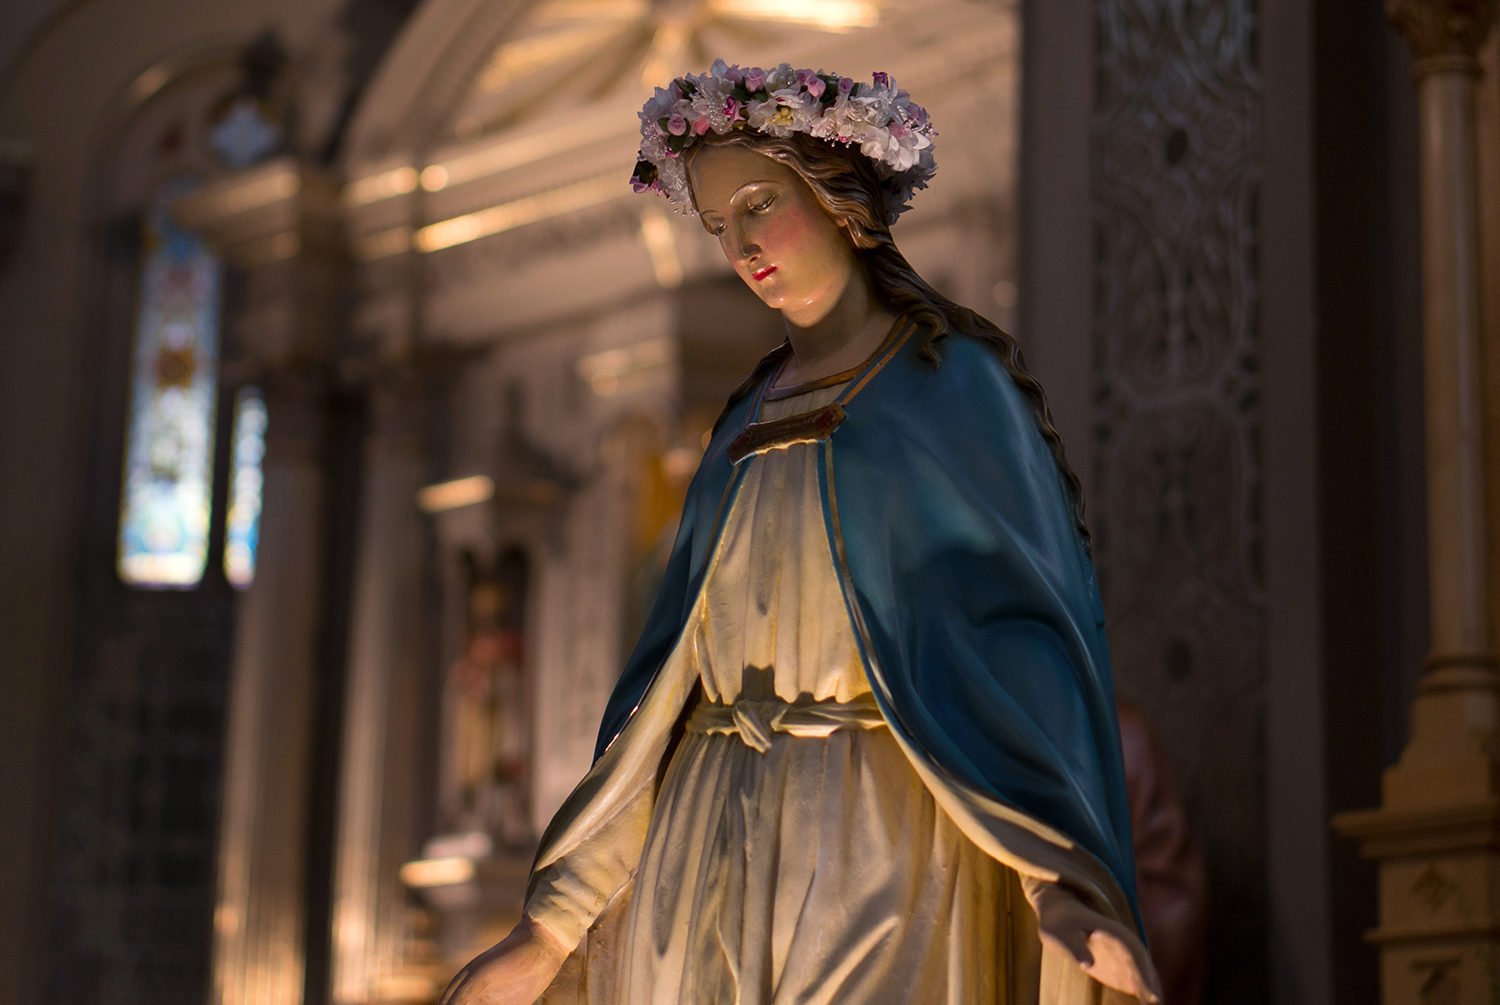 Catholics celebrate Mary with new feast day